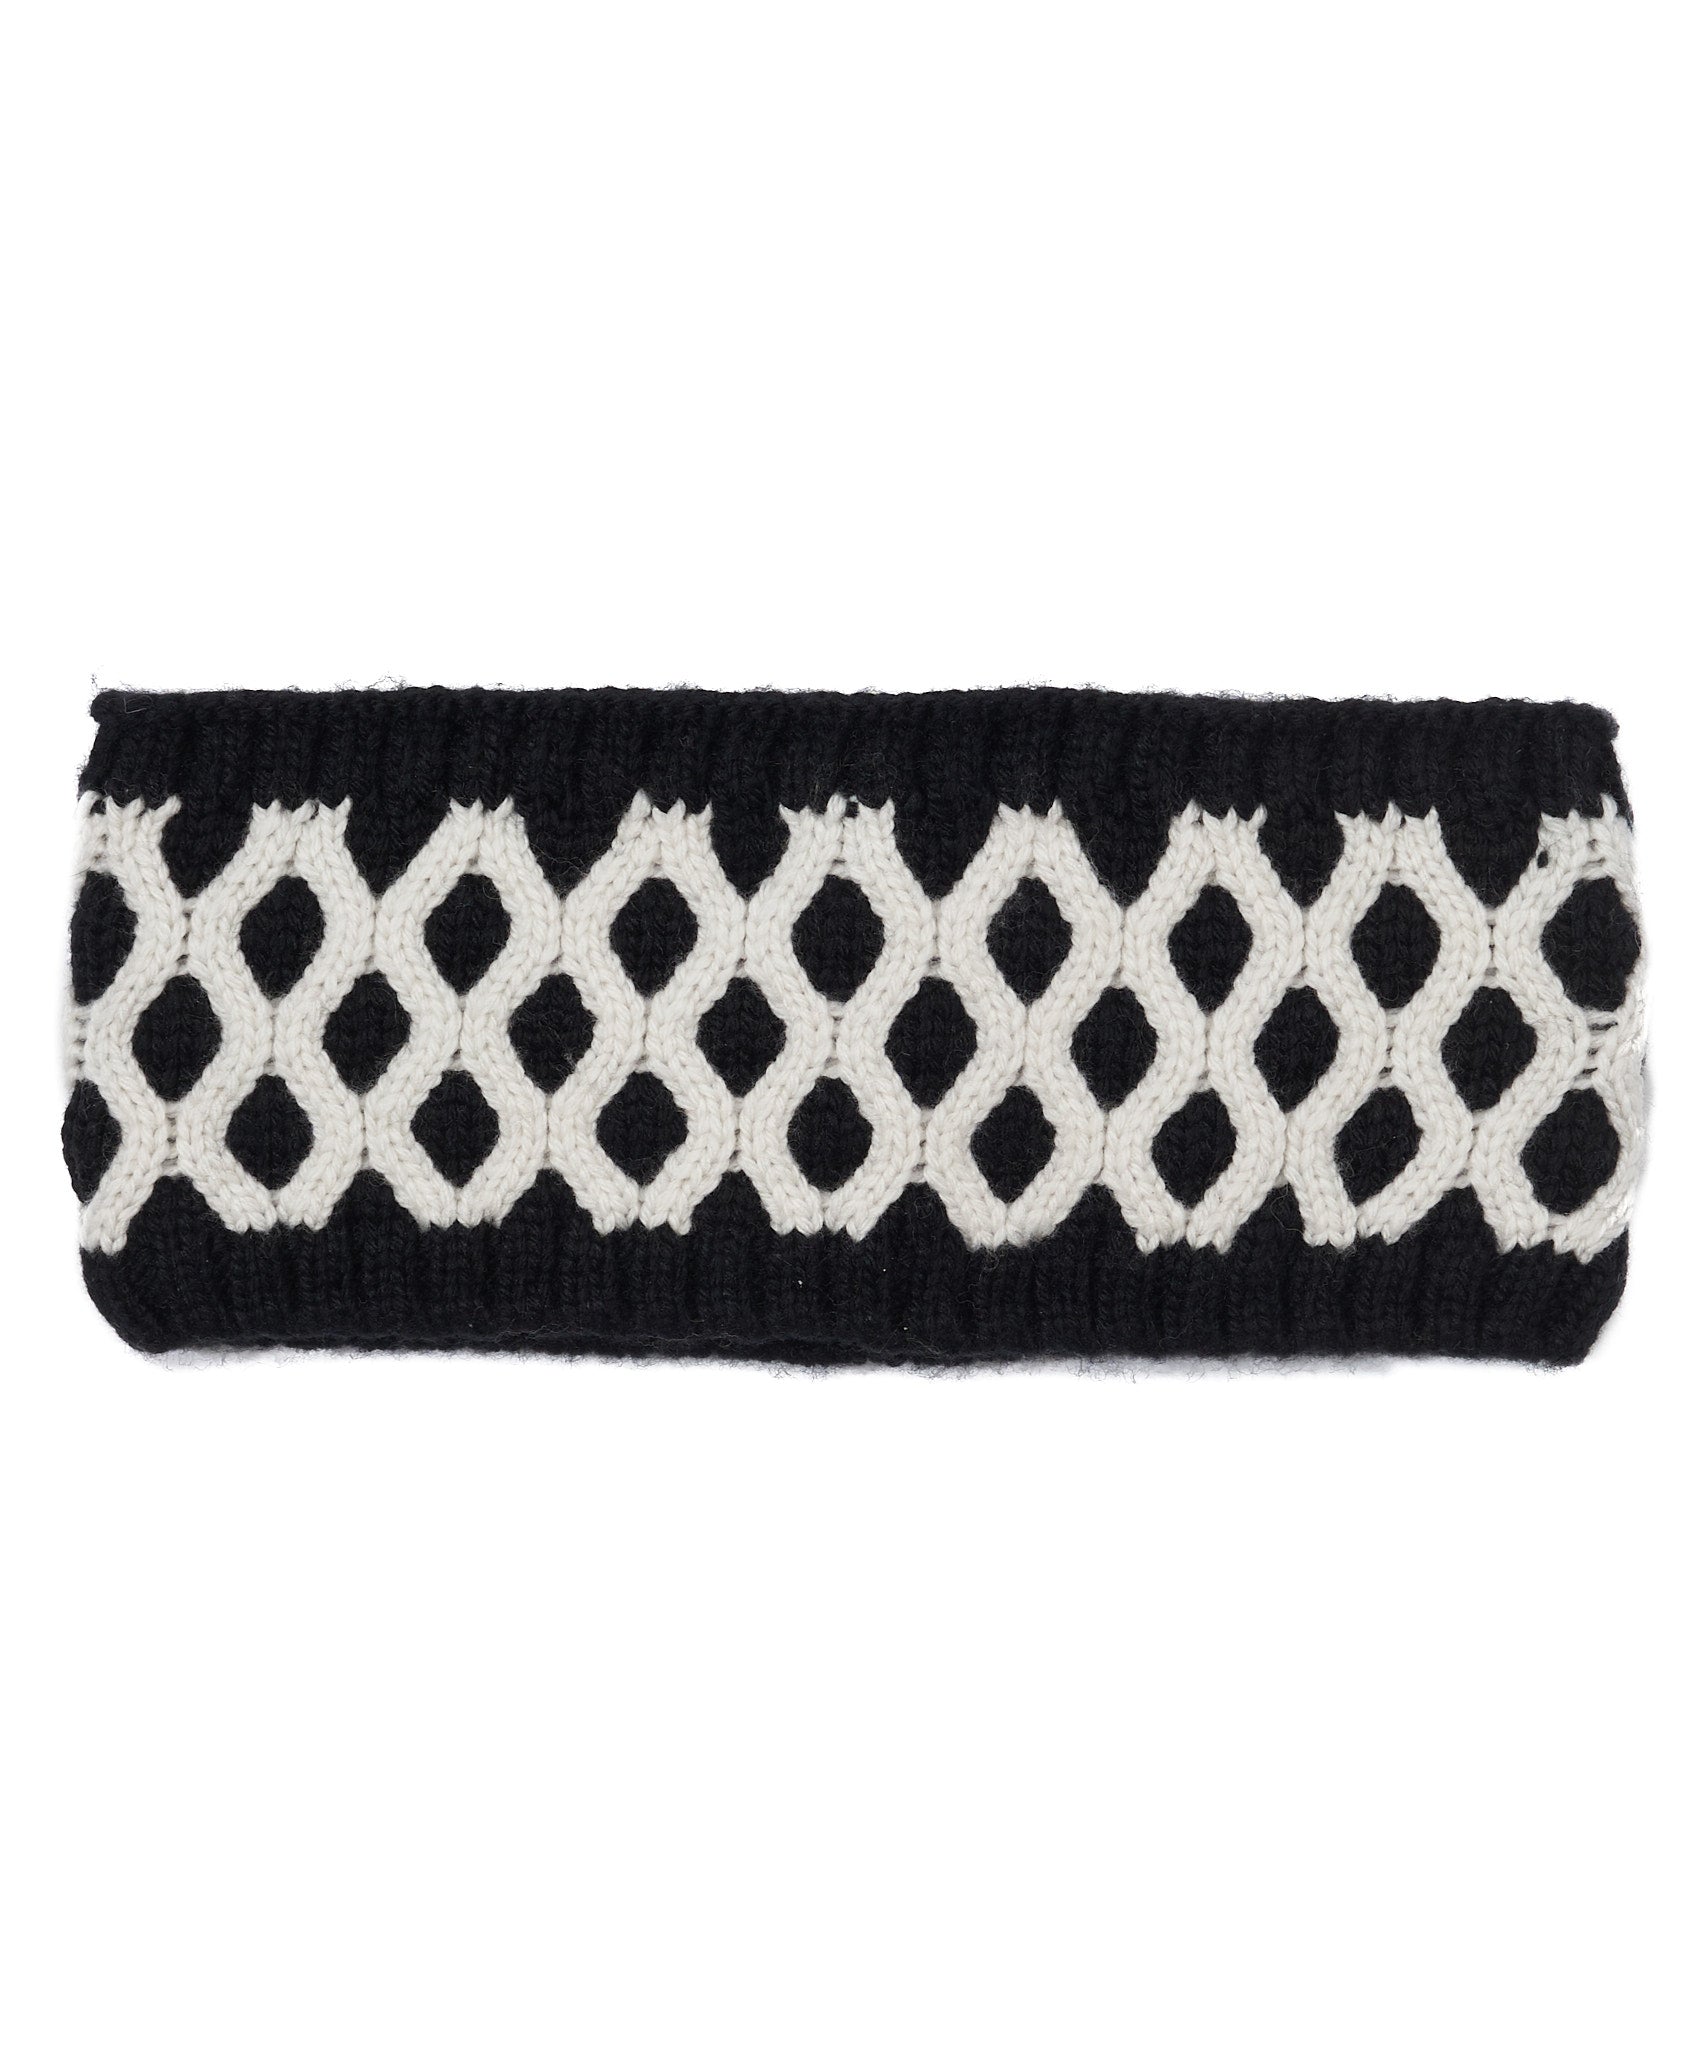 Recycled Bi-color Honeycomb Headband in color Black/White